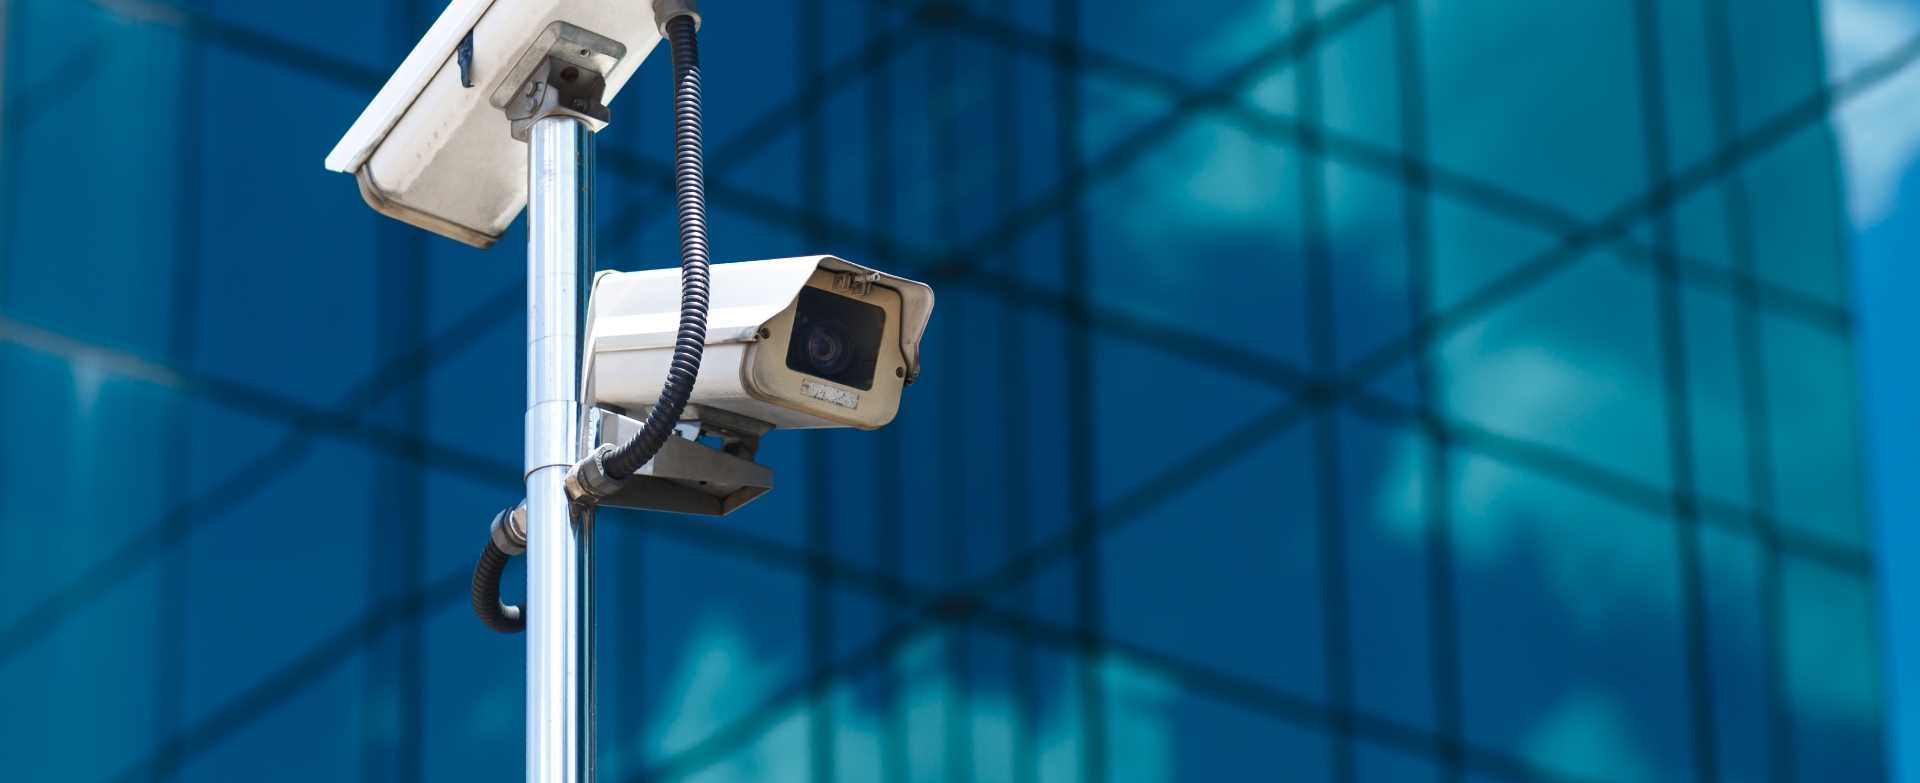 Home and Business CCTV installation outside of office